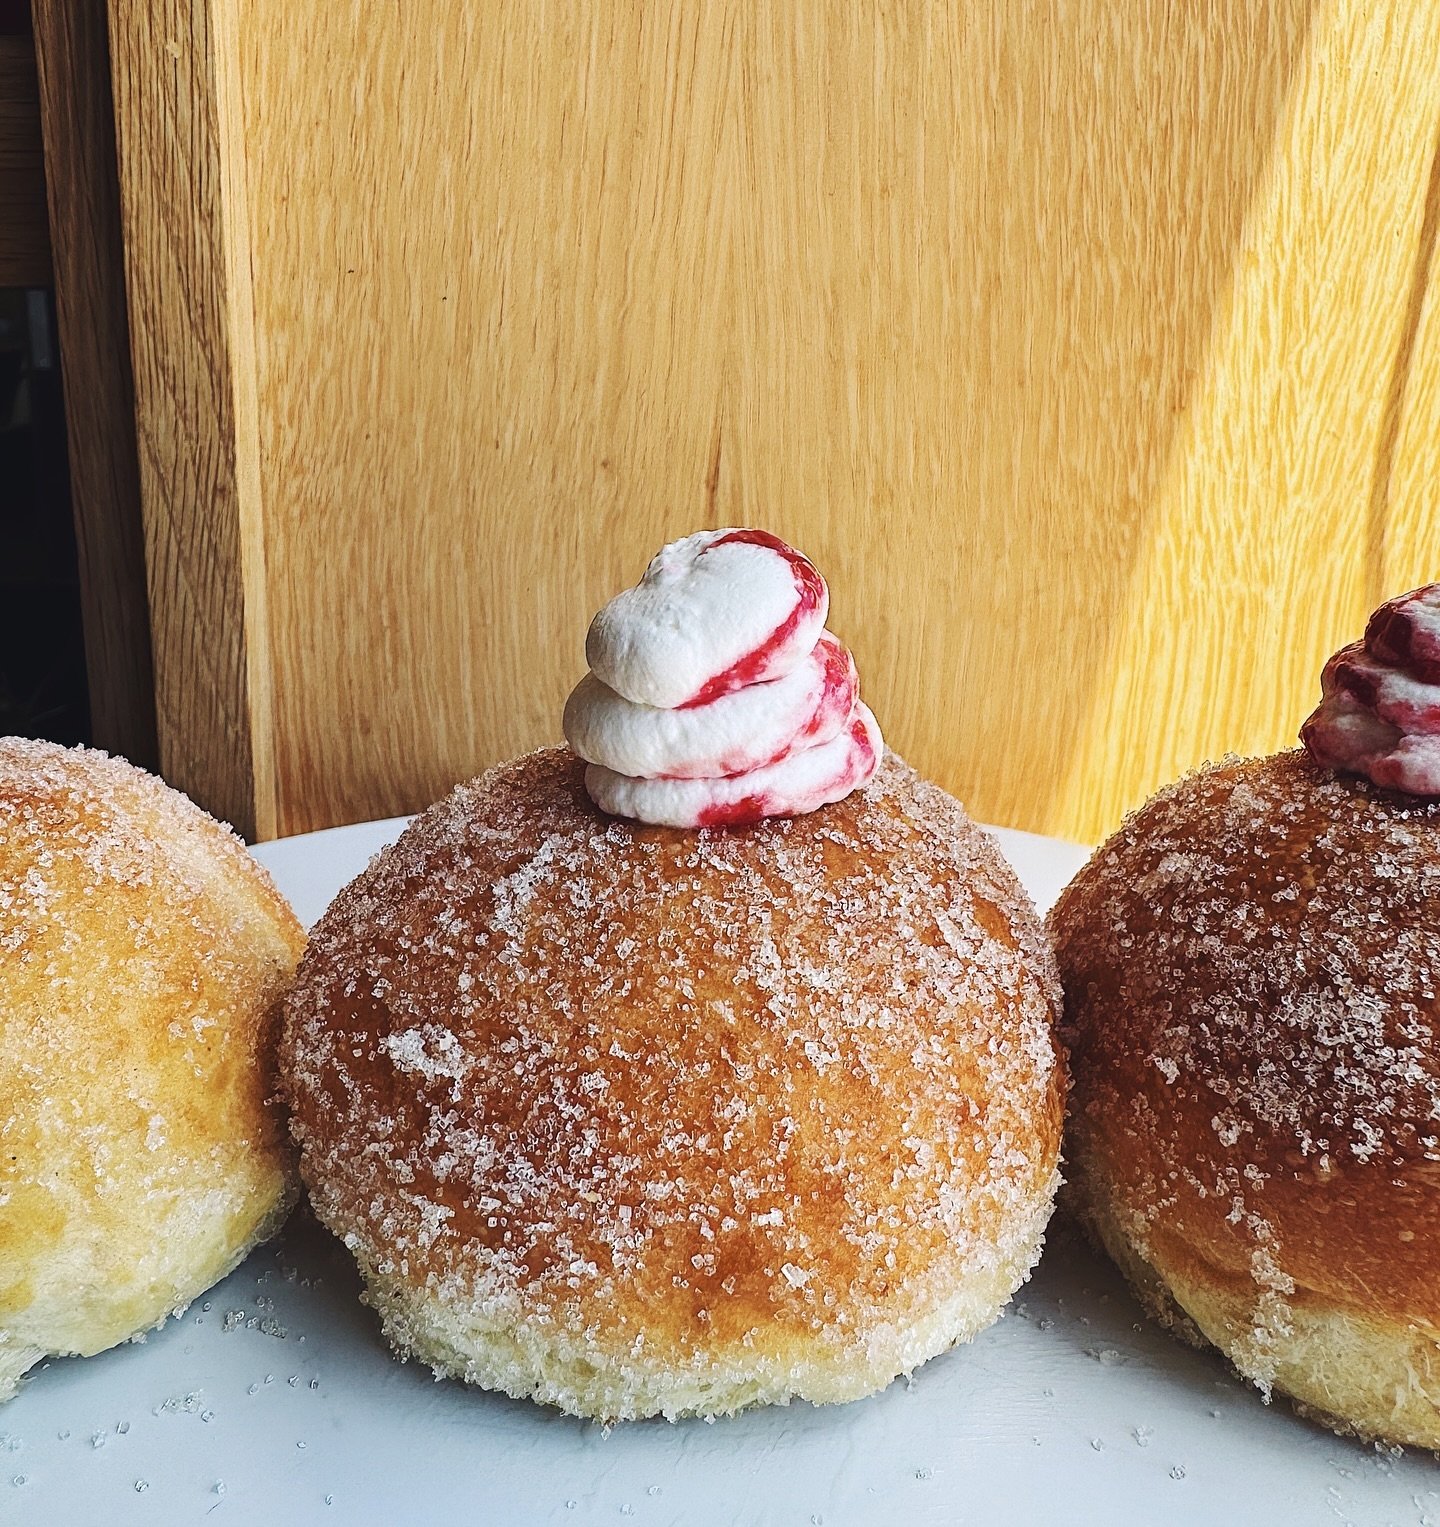 She&rsquo;s tender and sweet, and she&rsquo;s going to fit in so nicely in our pastry case this weekend. Please allow us to introduce the raspberry and cream bun. &hearts;️